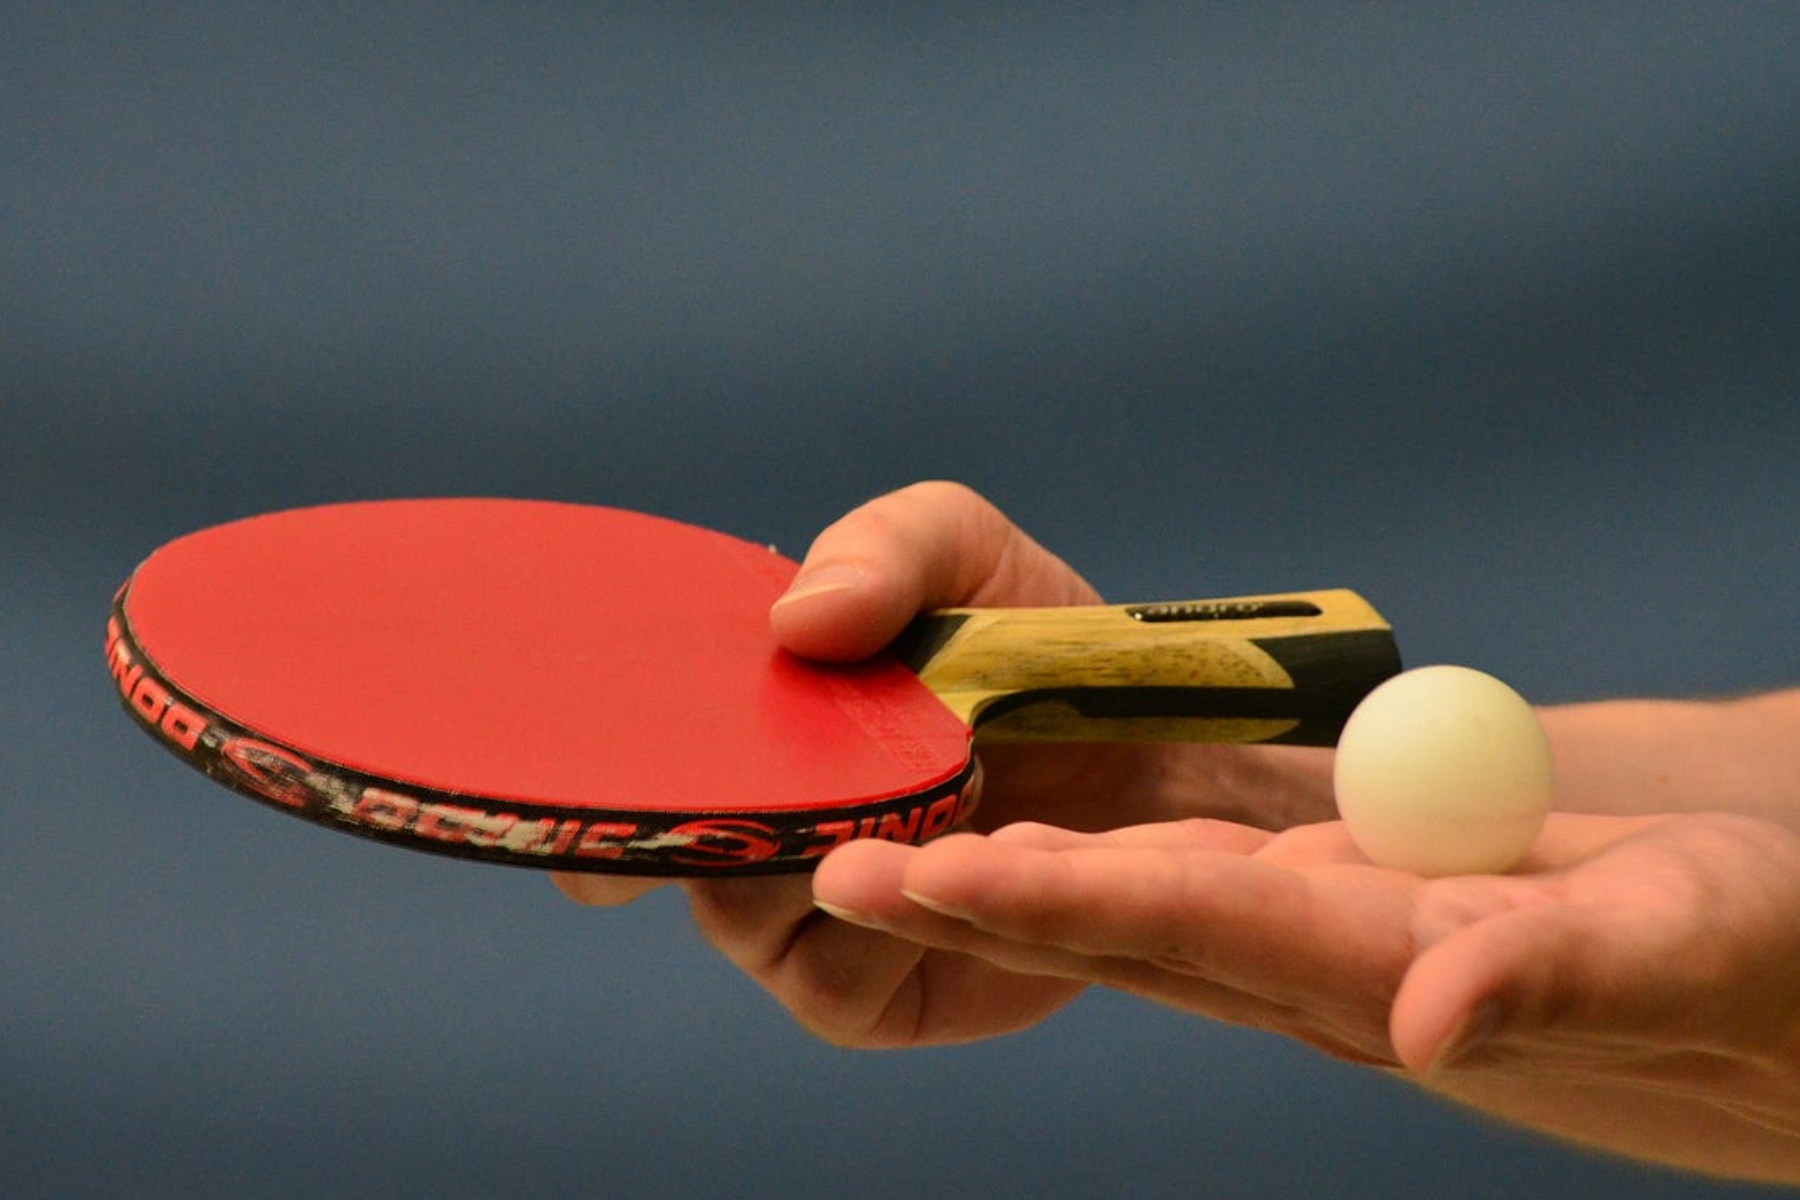 A person's hand grasping a ping-pong paddle and a ball